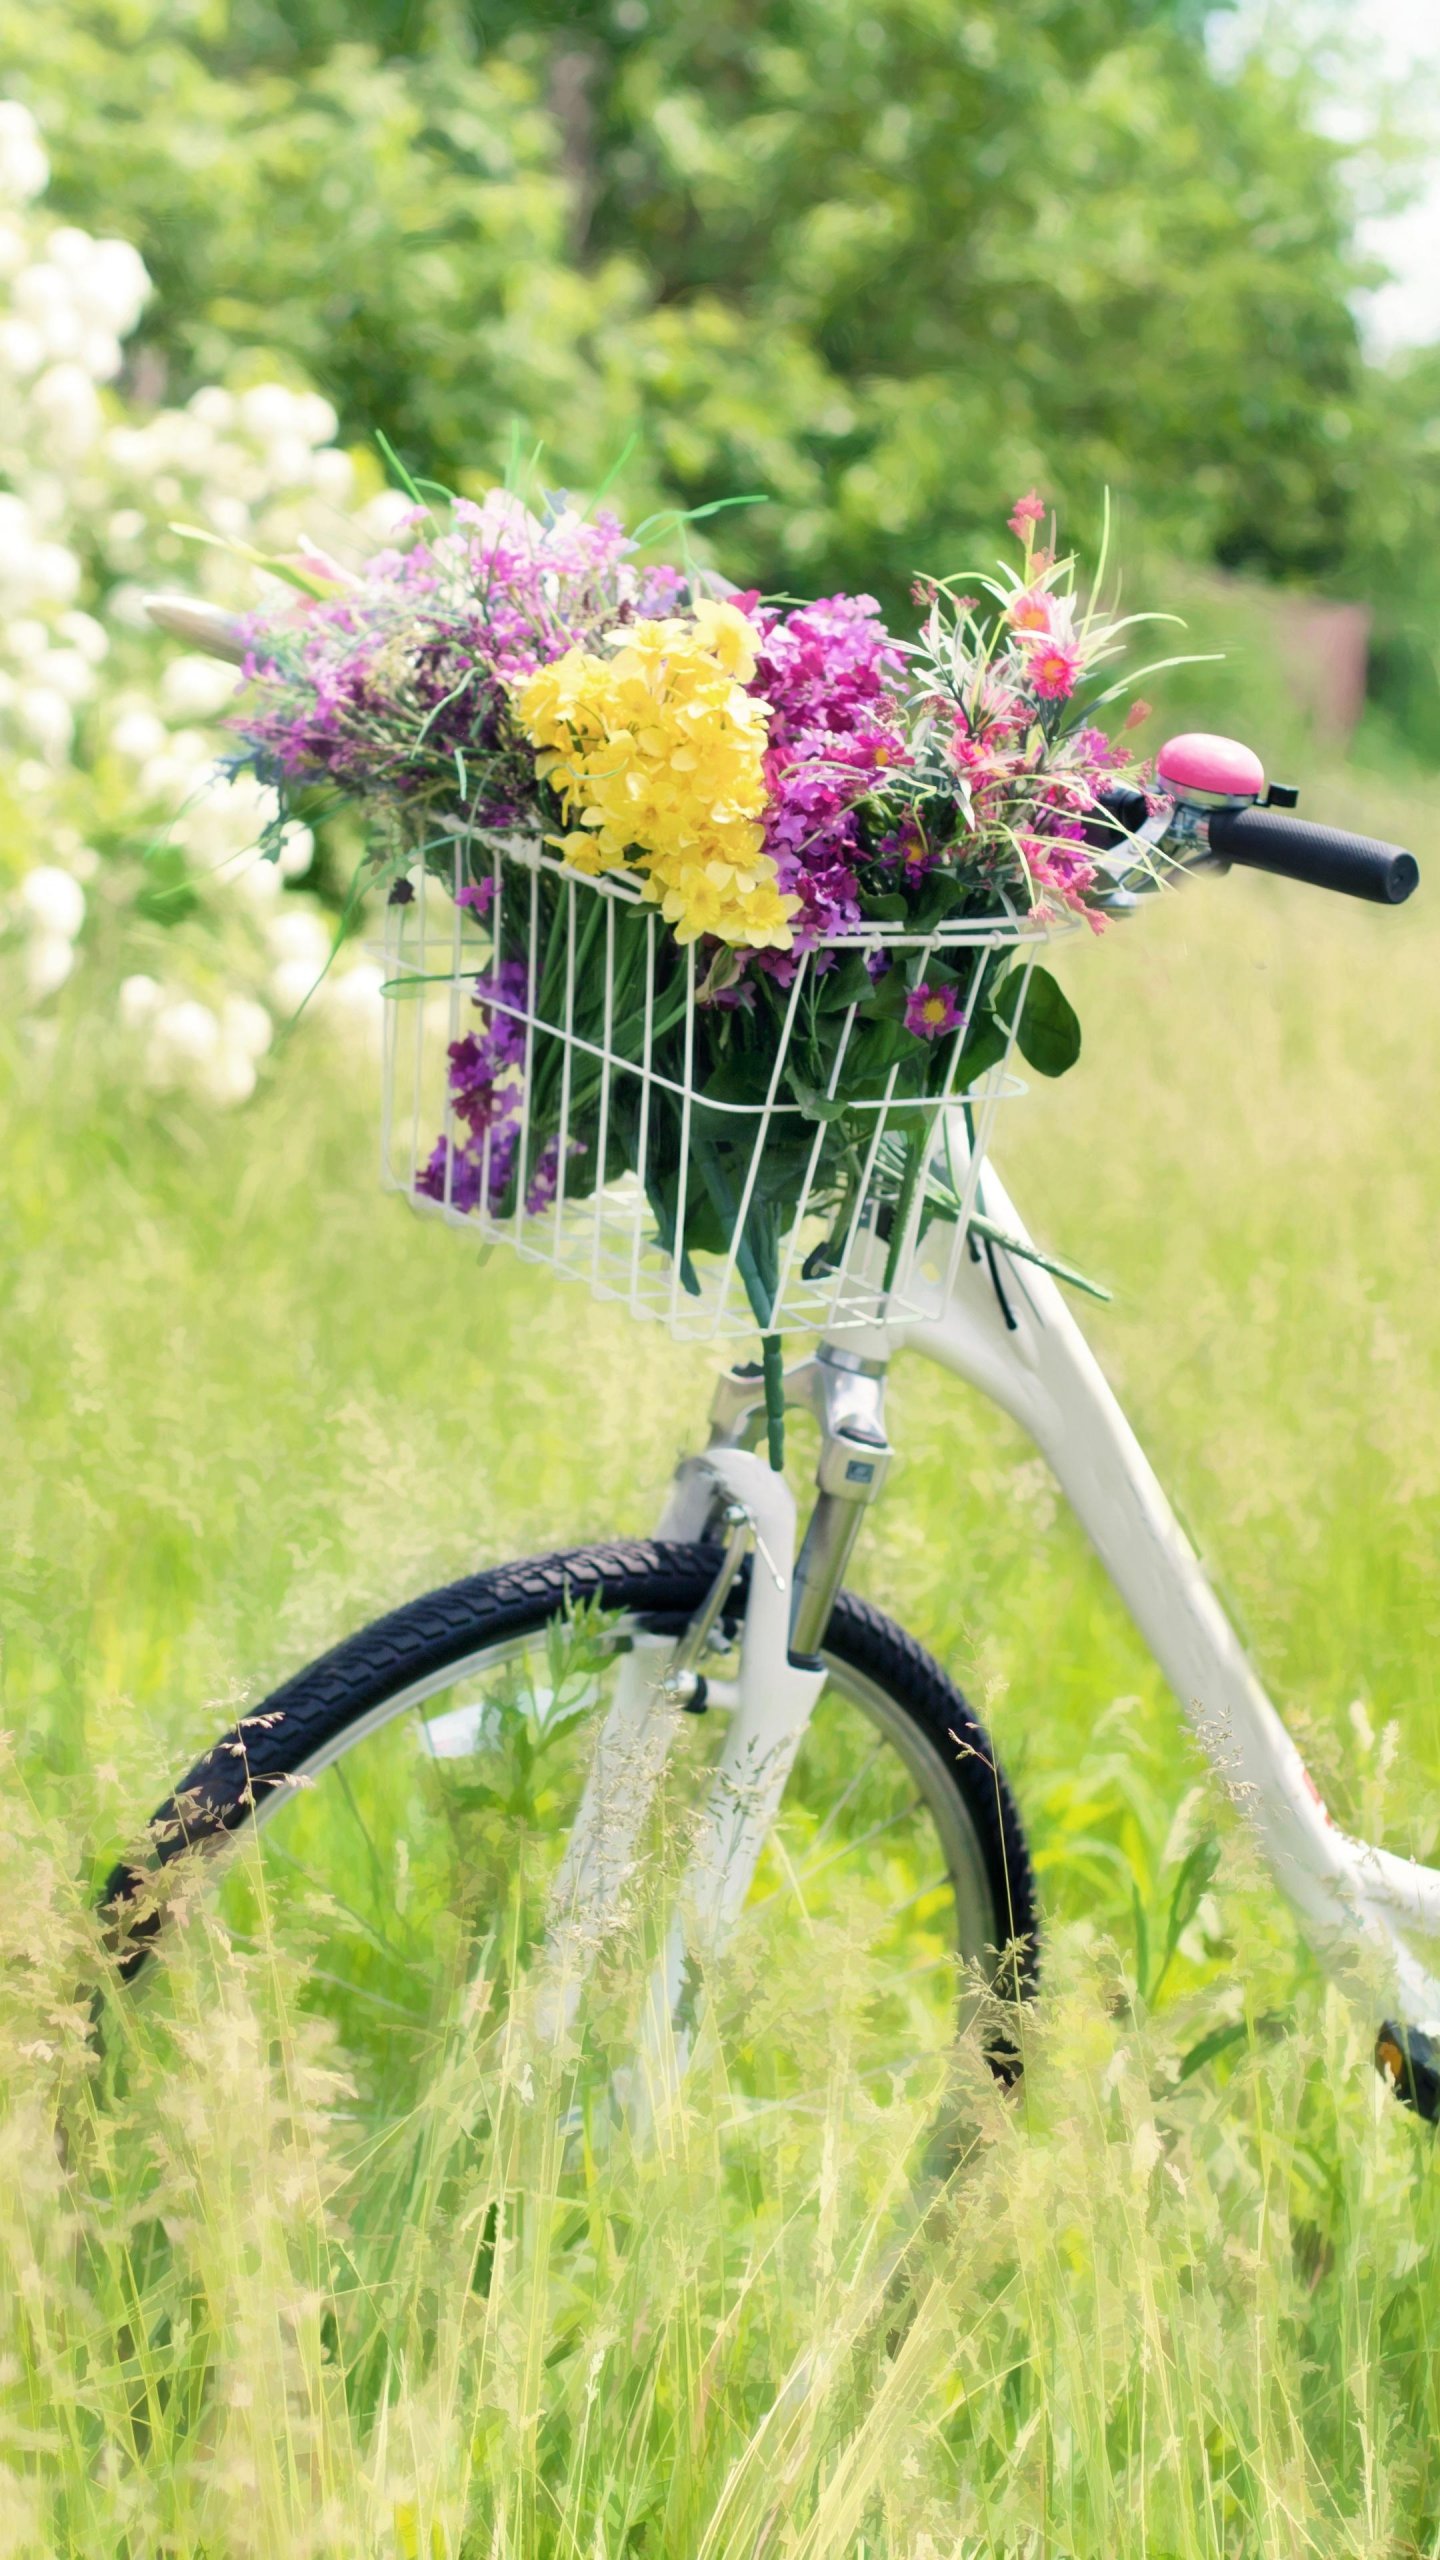 Romantic Bicycle in Meadow Wallpaper - iPhone, Android & Desktop Backgrounds